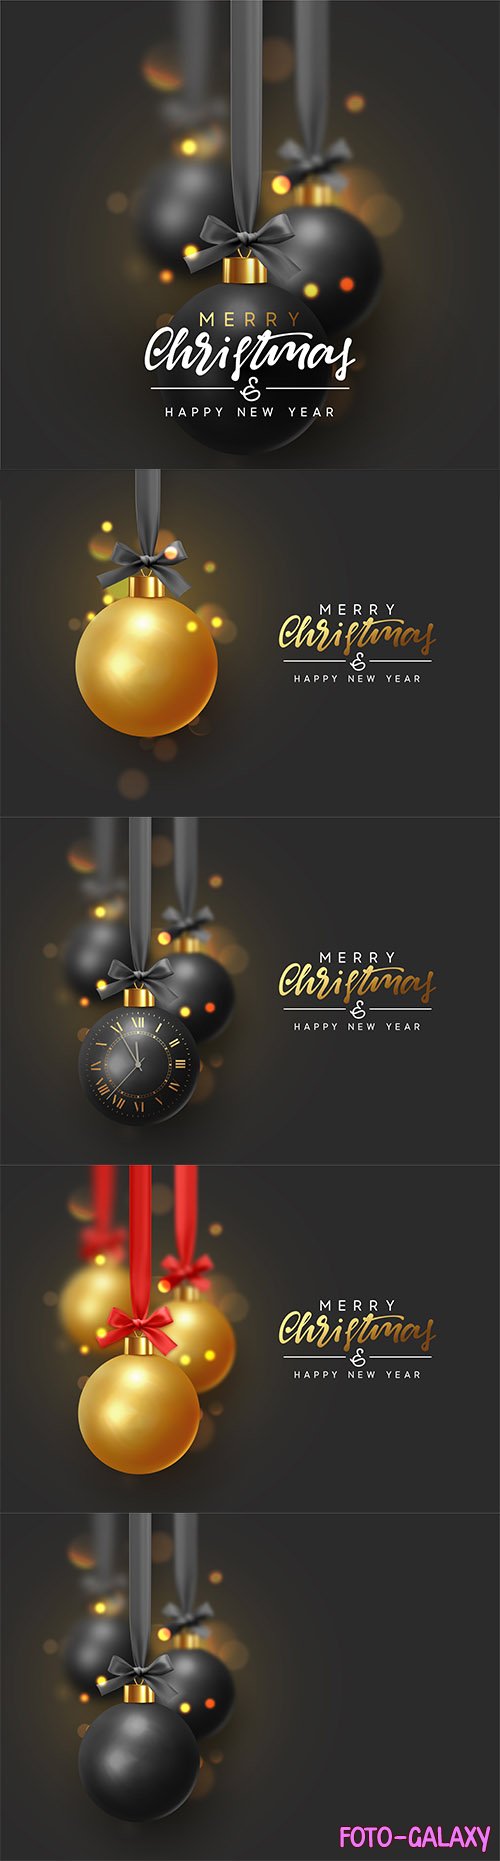 Vector merry christmas and happy new year, xmas golden balls